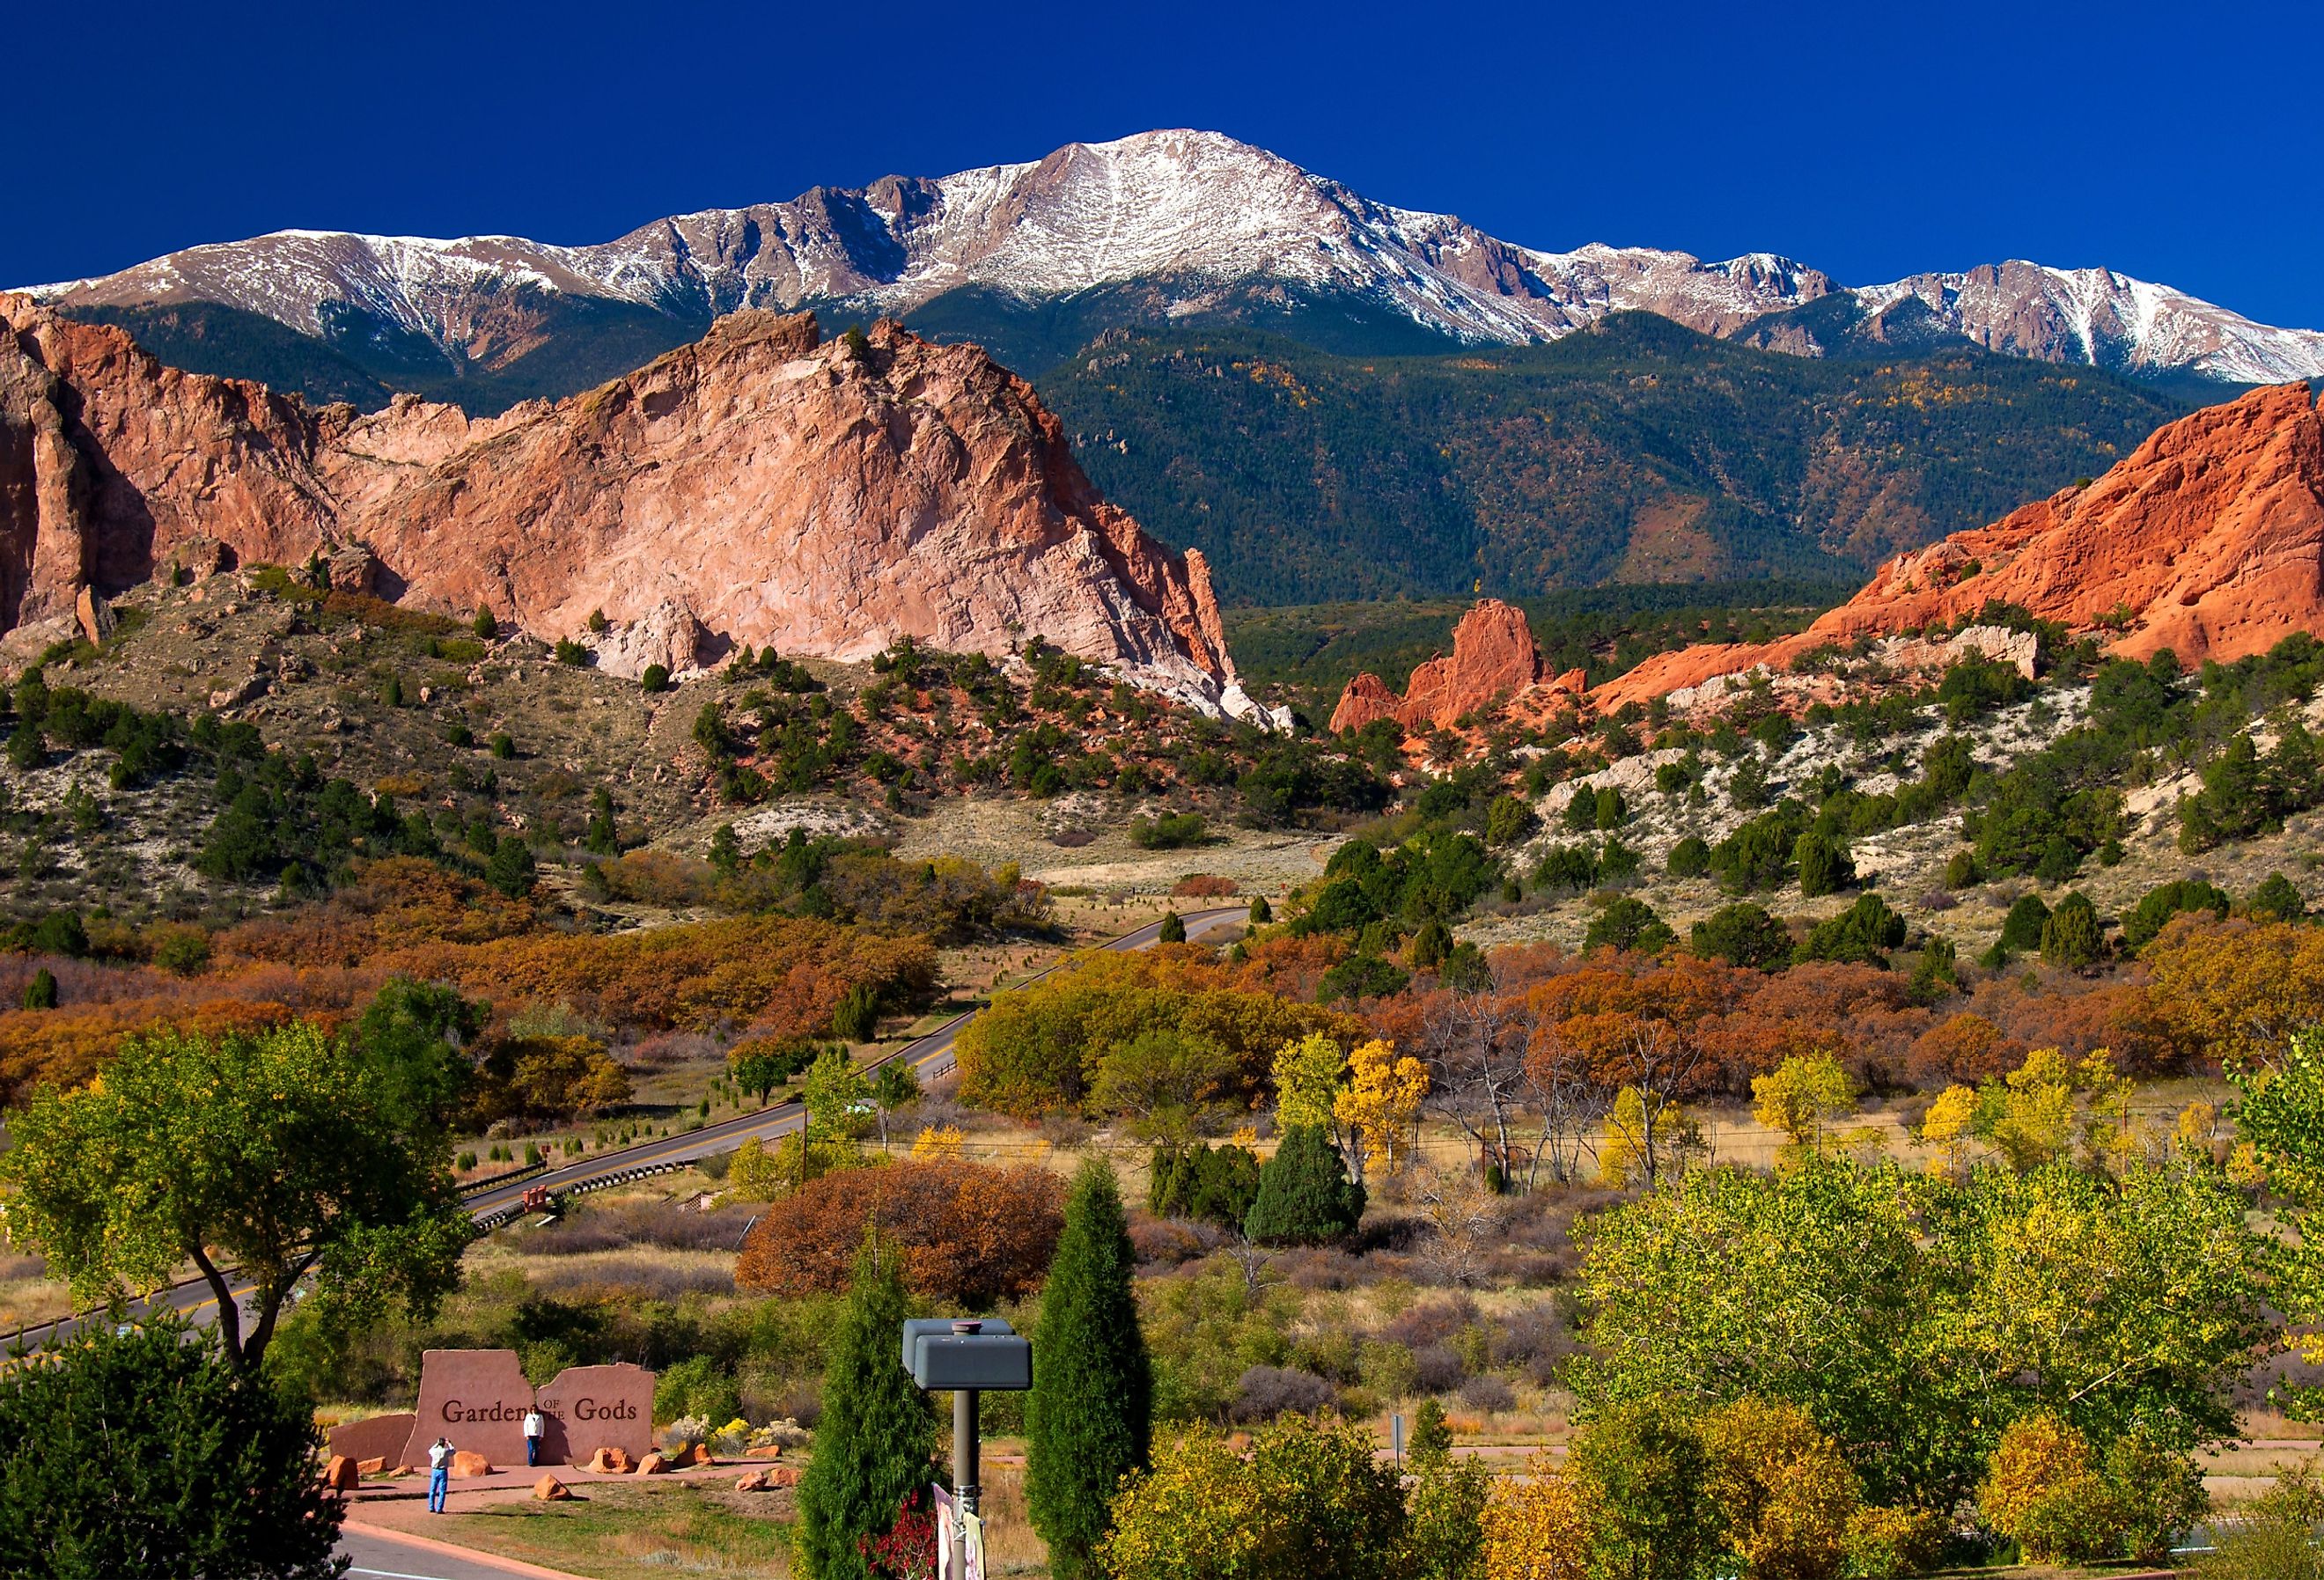 Beautiful Garden of the Gods Park with Pikes Peak soaring in the background, taken from the Garden of the Gods Visitor Center. Image credit John Hoffman via Shutterstock.